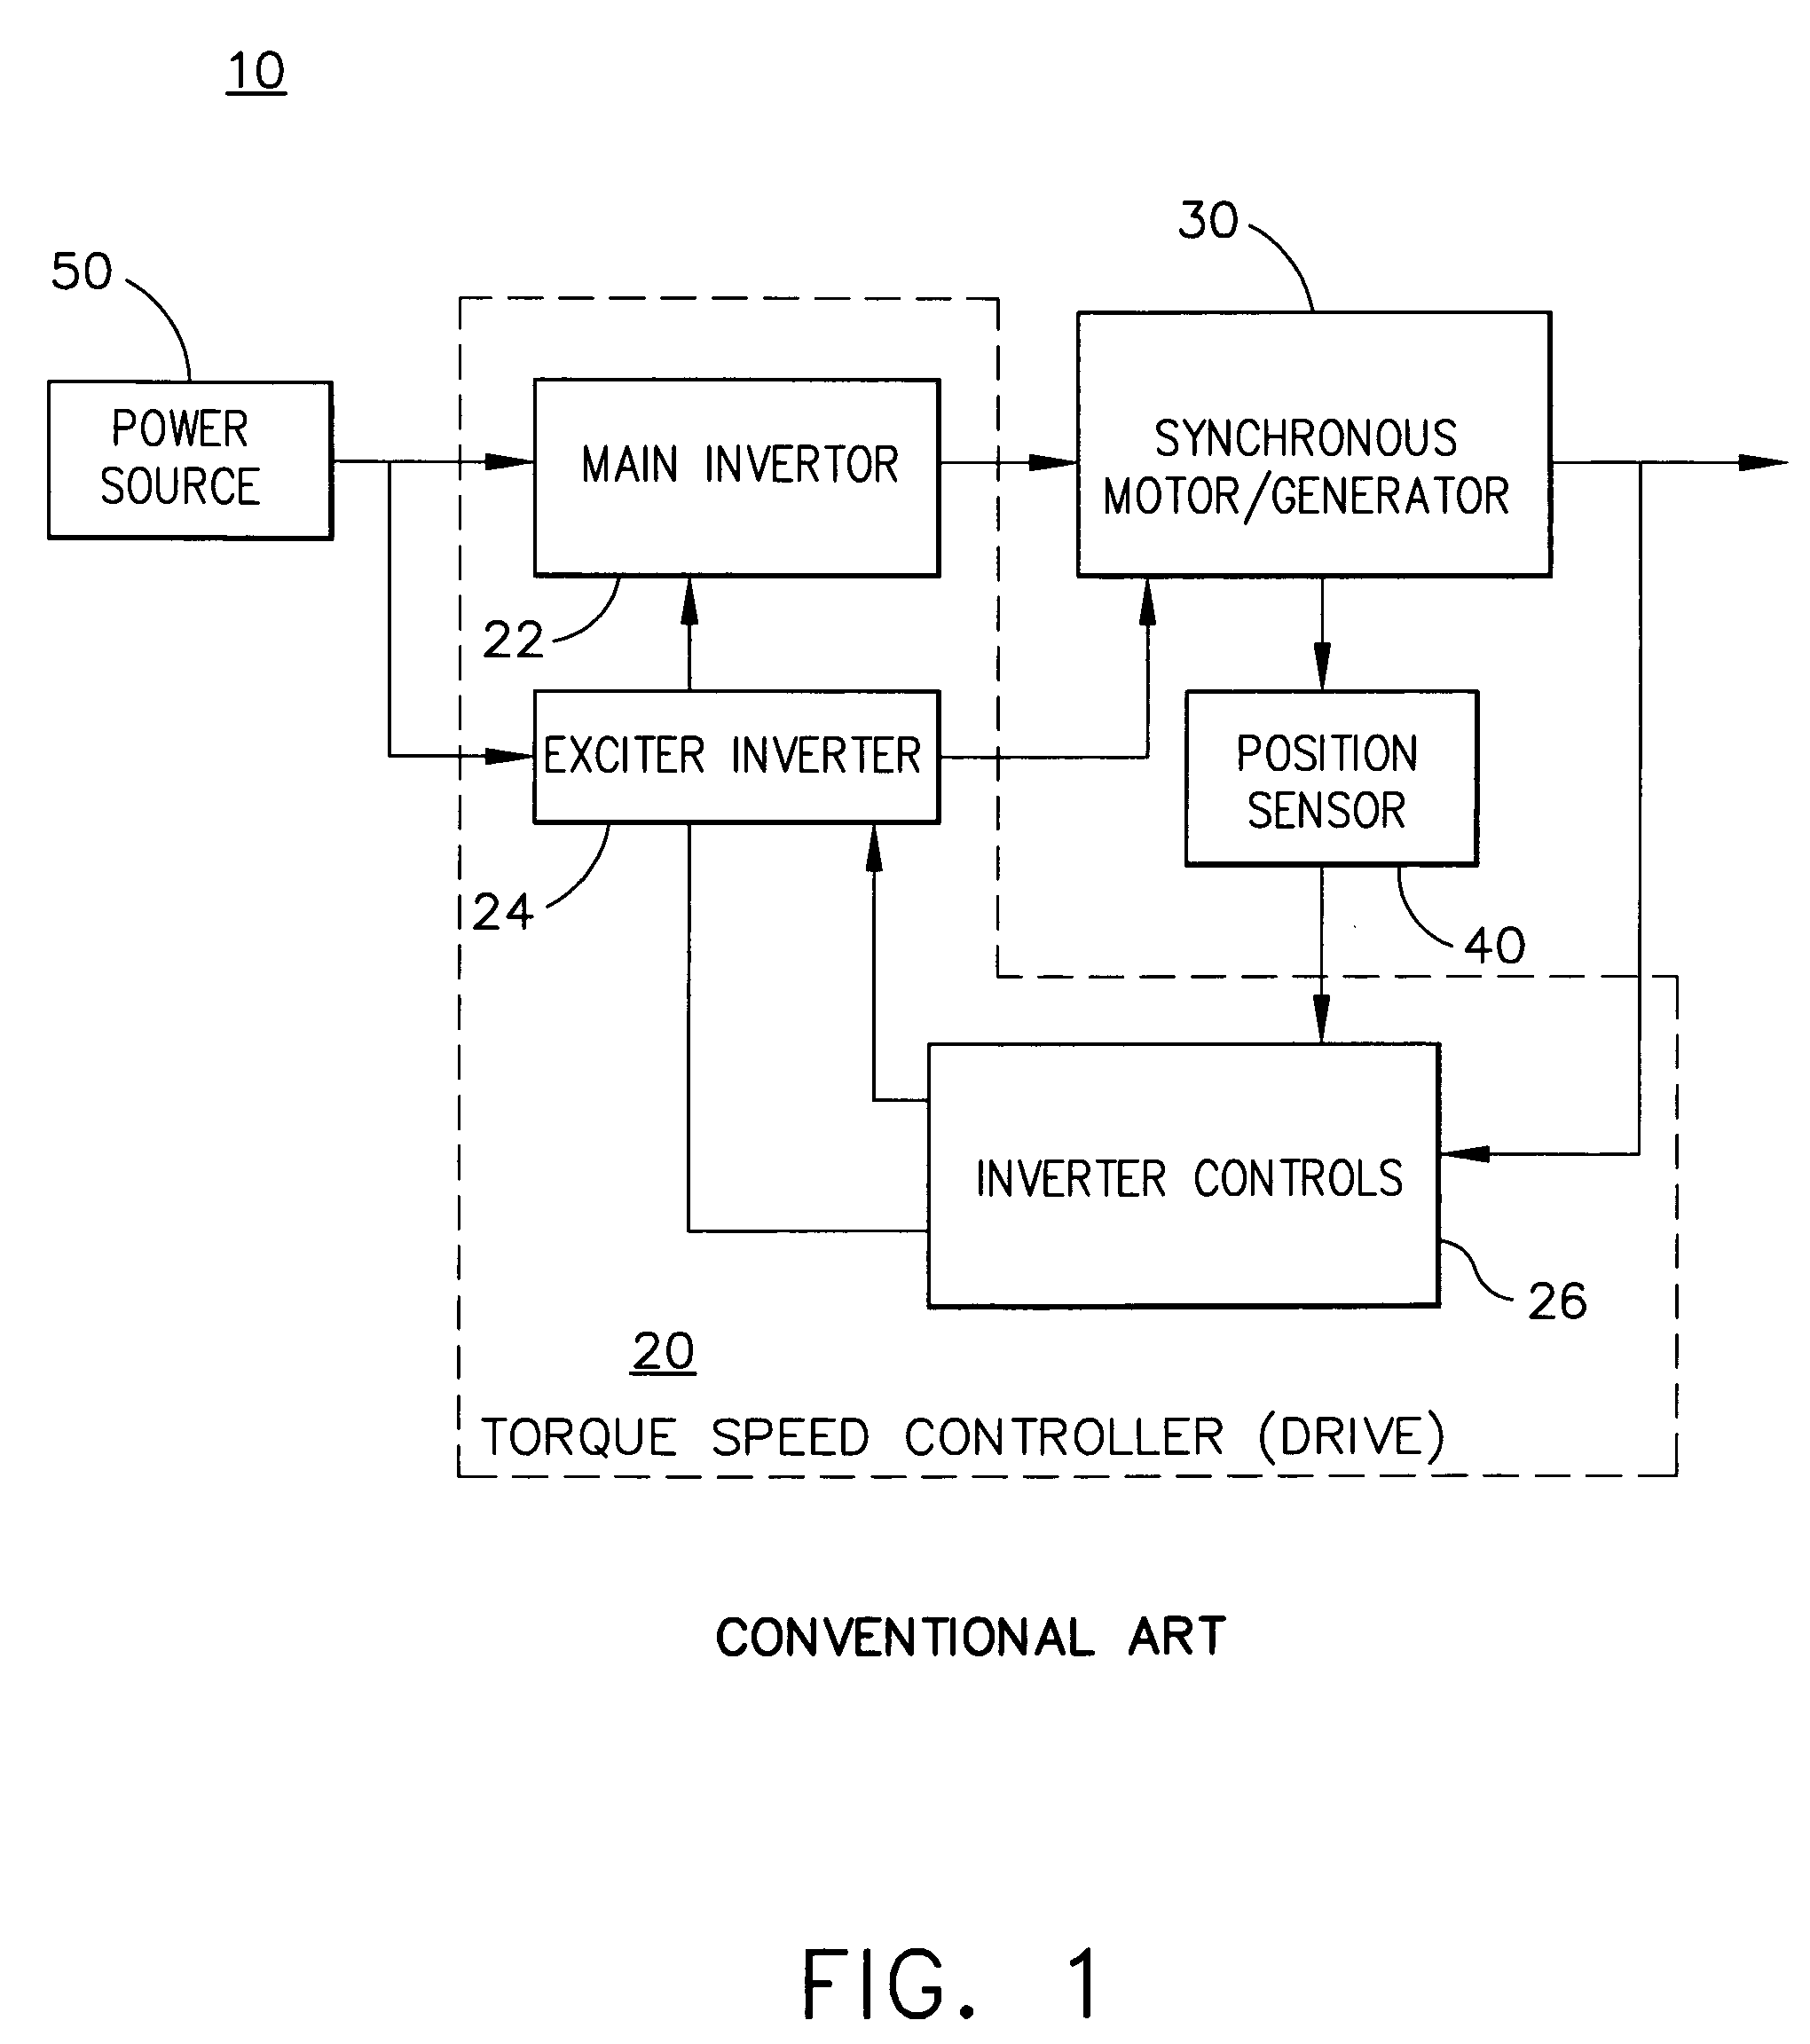 Apparatus and method to control torque and voltage of an AC machine